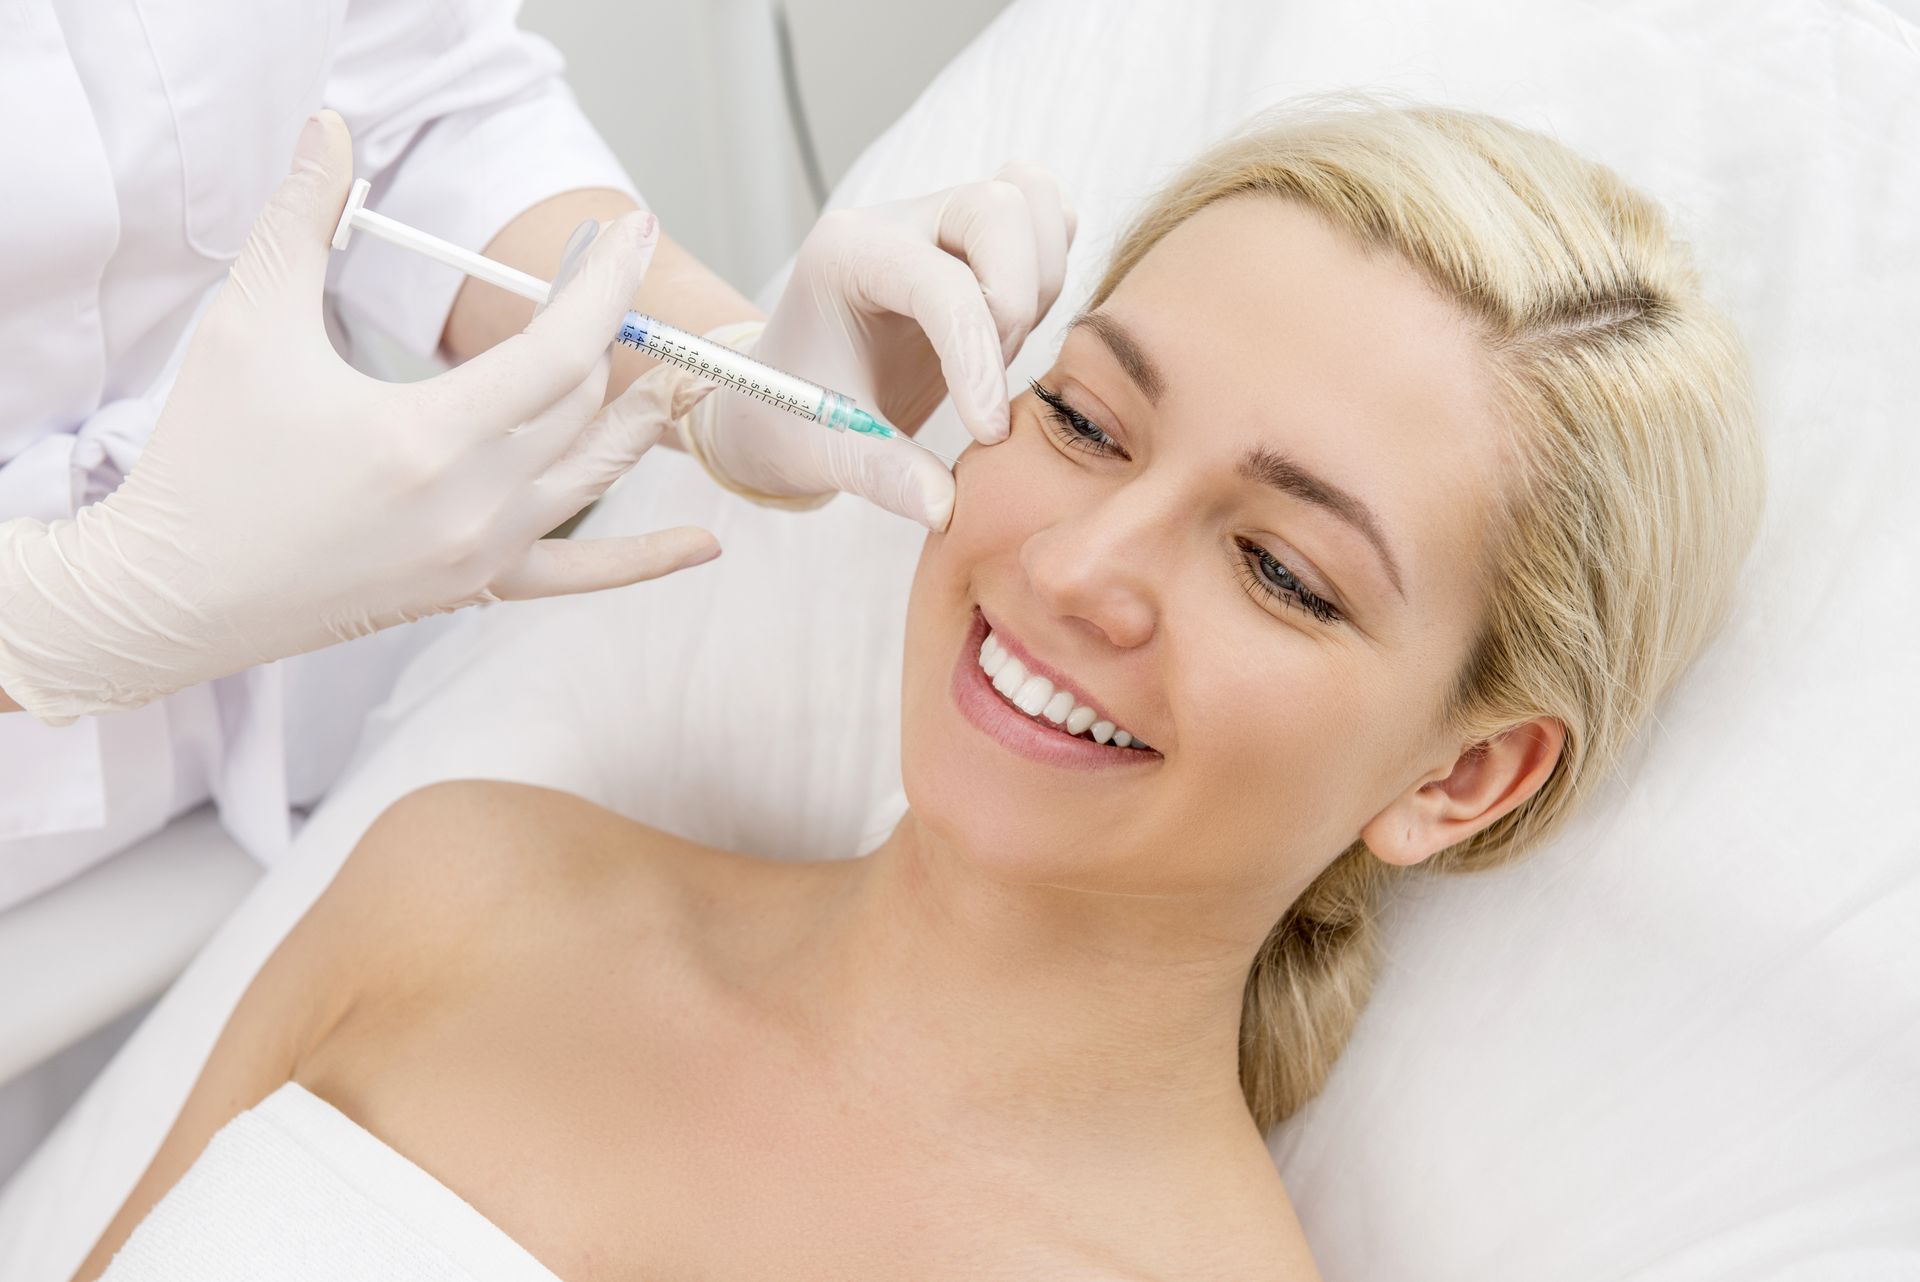 a woman is smiling while getting a botox injection in her face